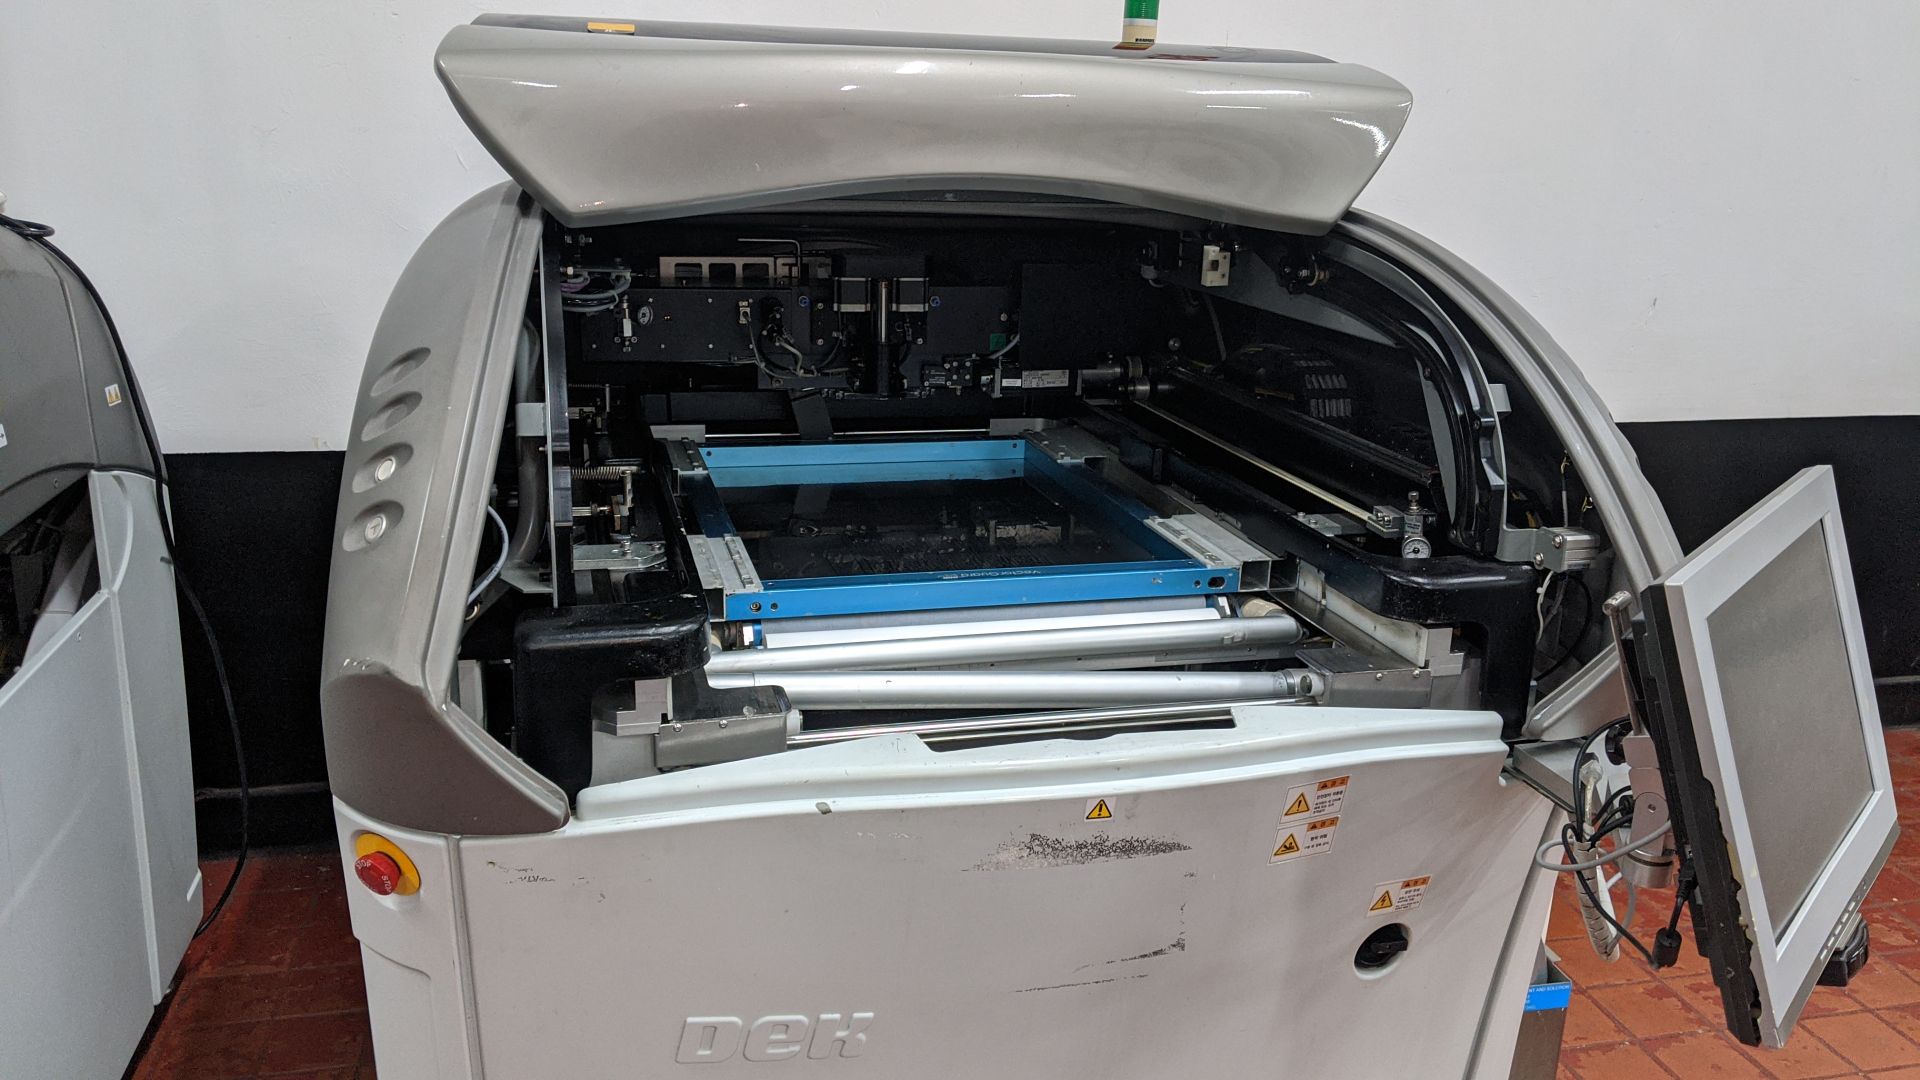 2006 DEK Galaxy printer for use with Printed Circuit Board Manufacturing - Image 15 of 23